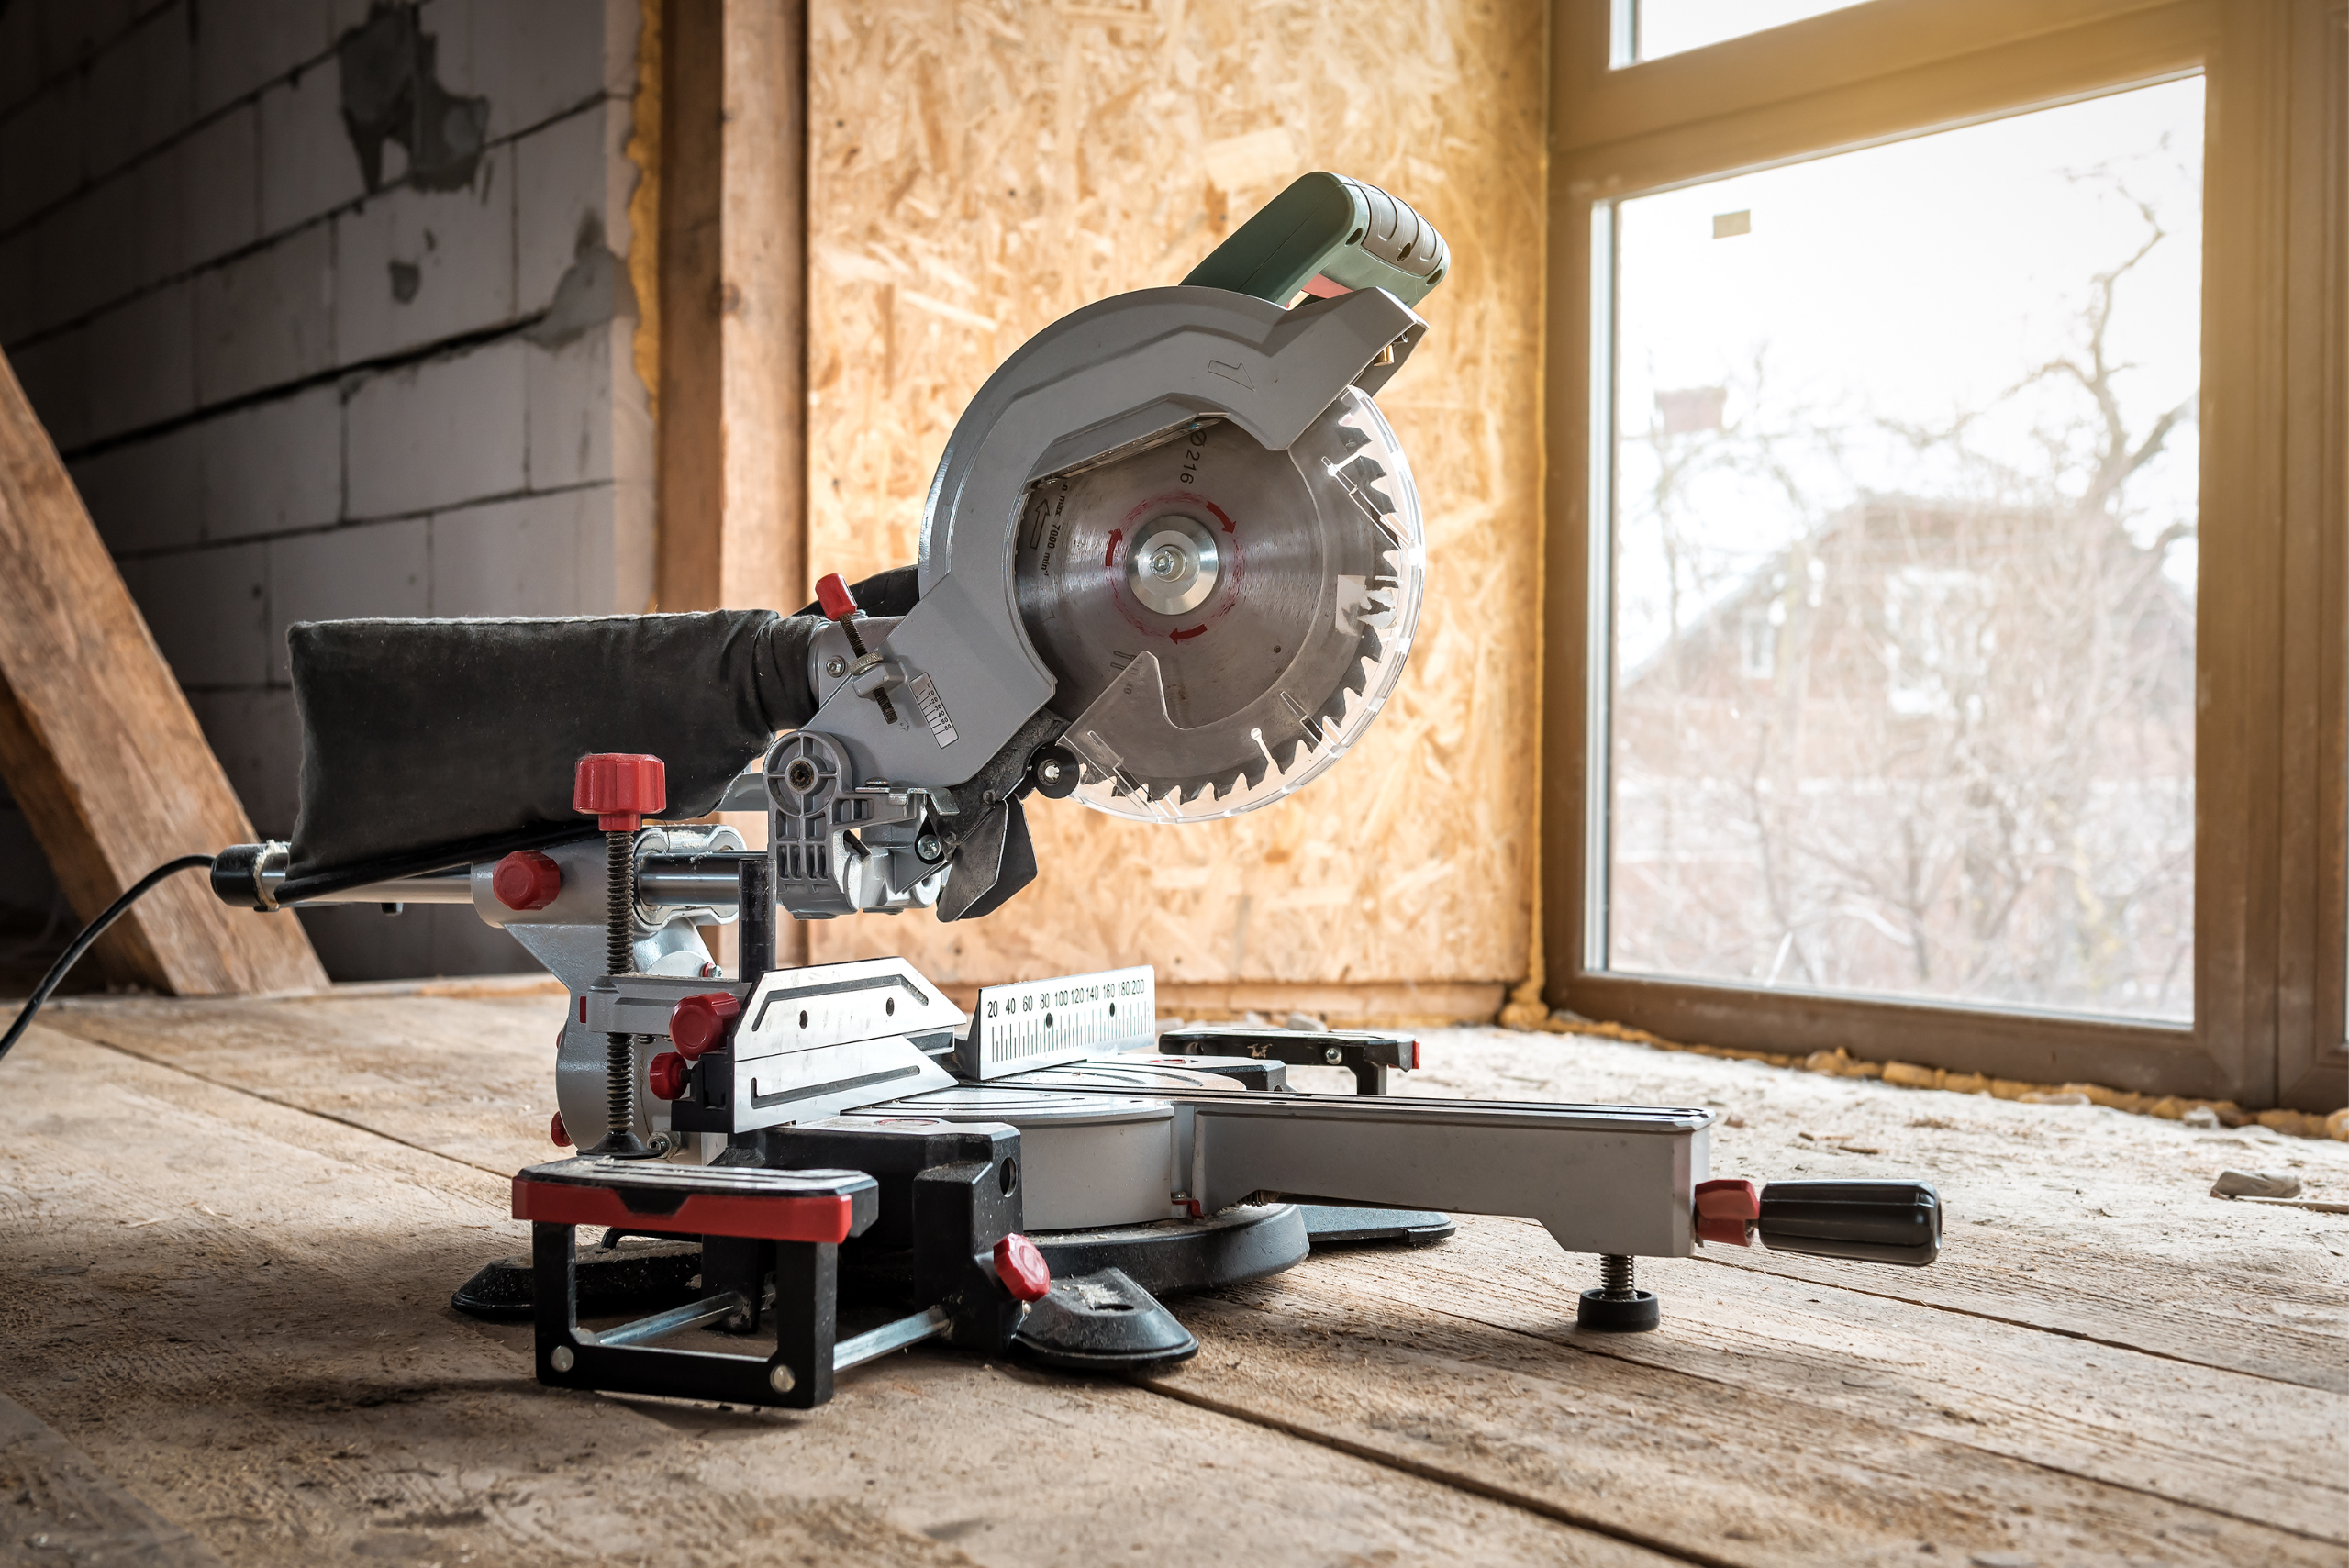 Miter saw in a building mid construction.